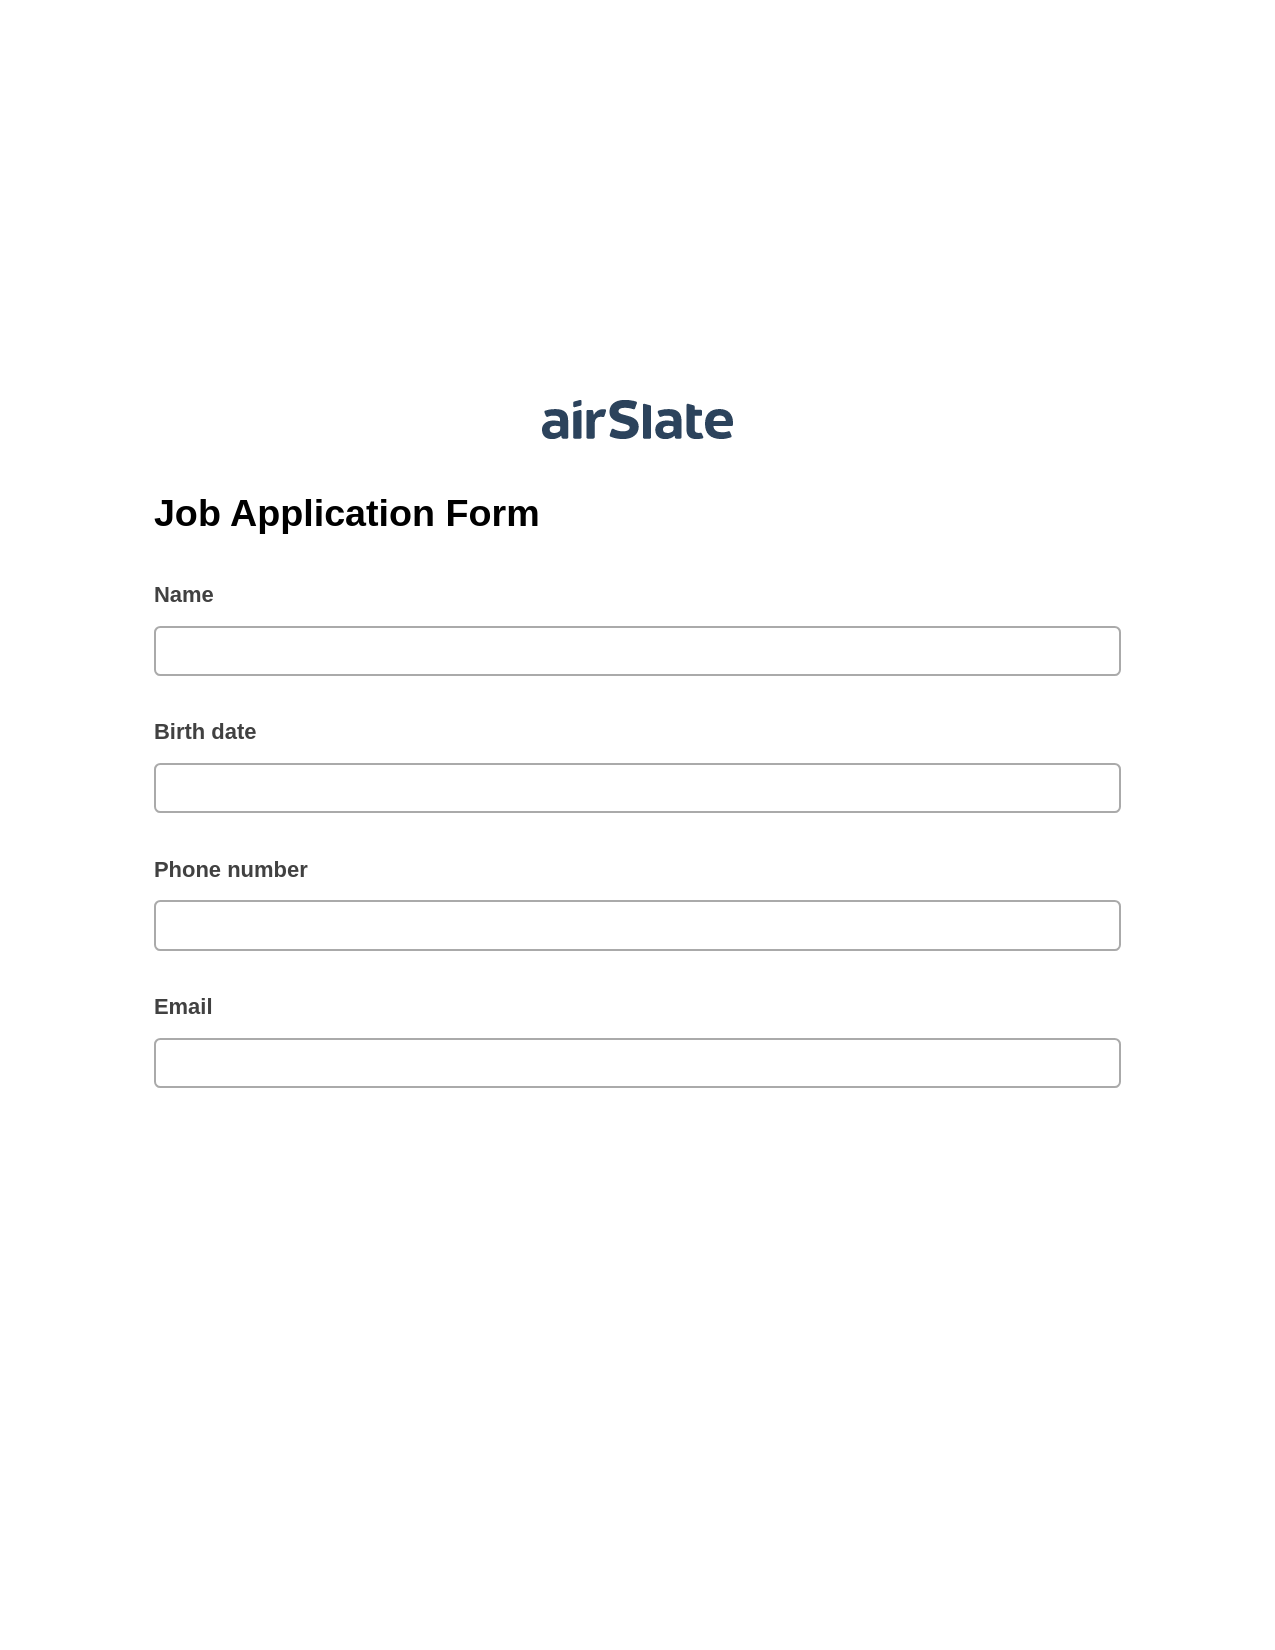 Multirole Job Application Form Pre-fill Dropdown from Airtable, Unassign Role Bot, Export to Google Sheet Bot